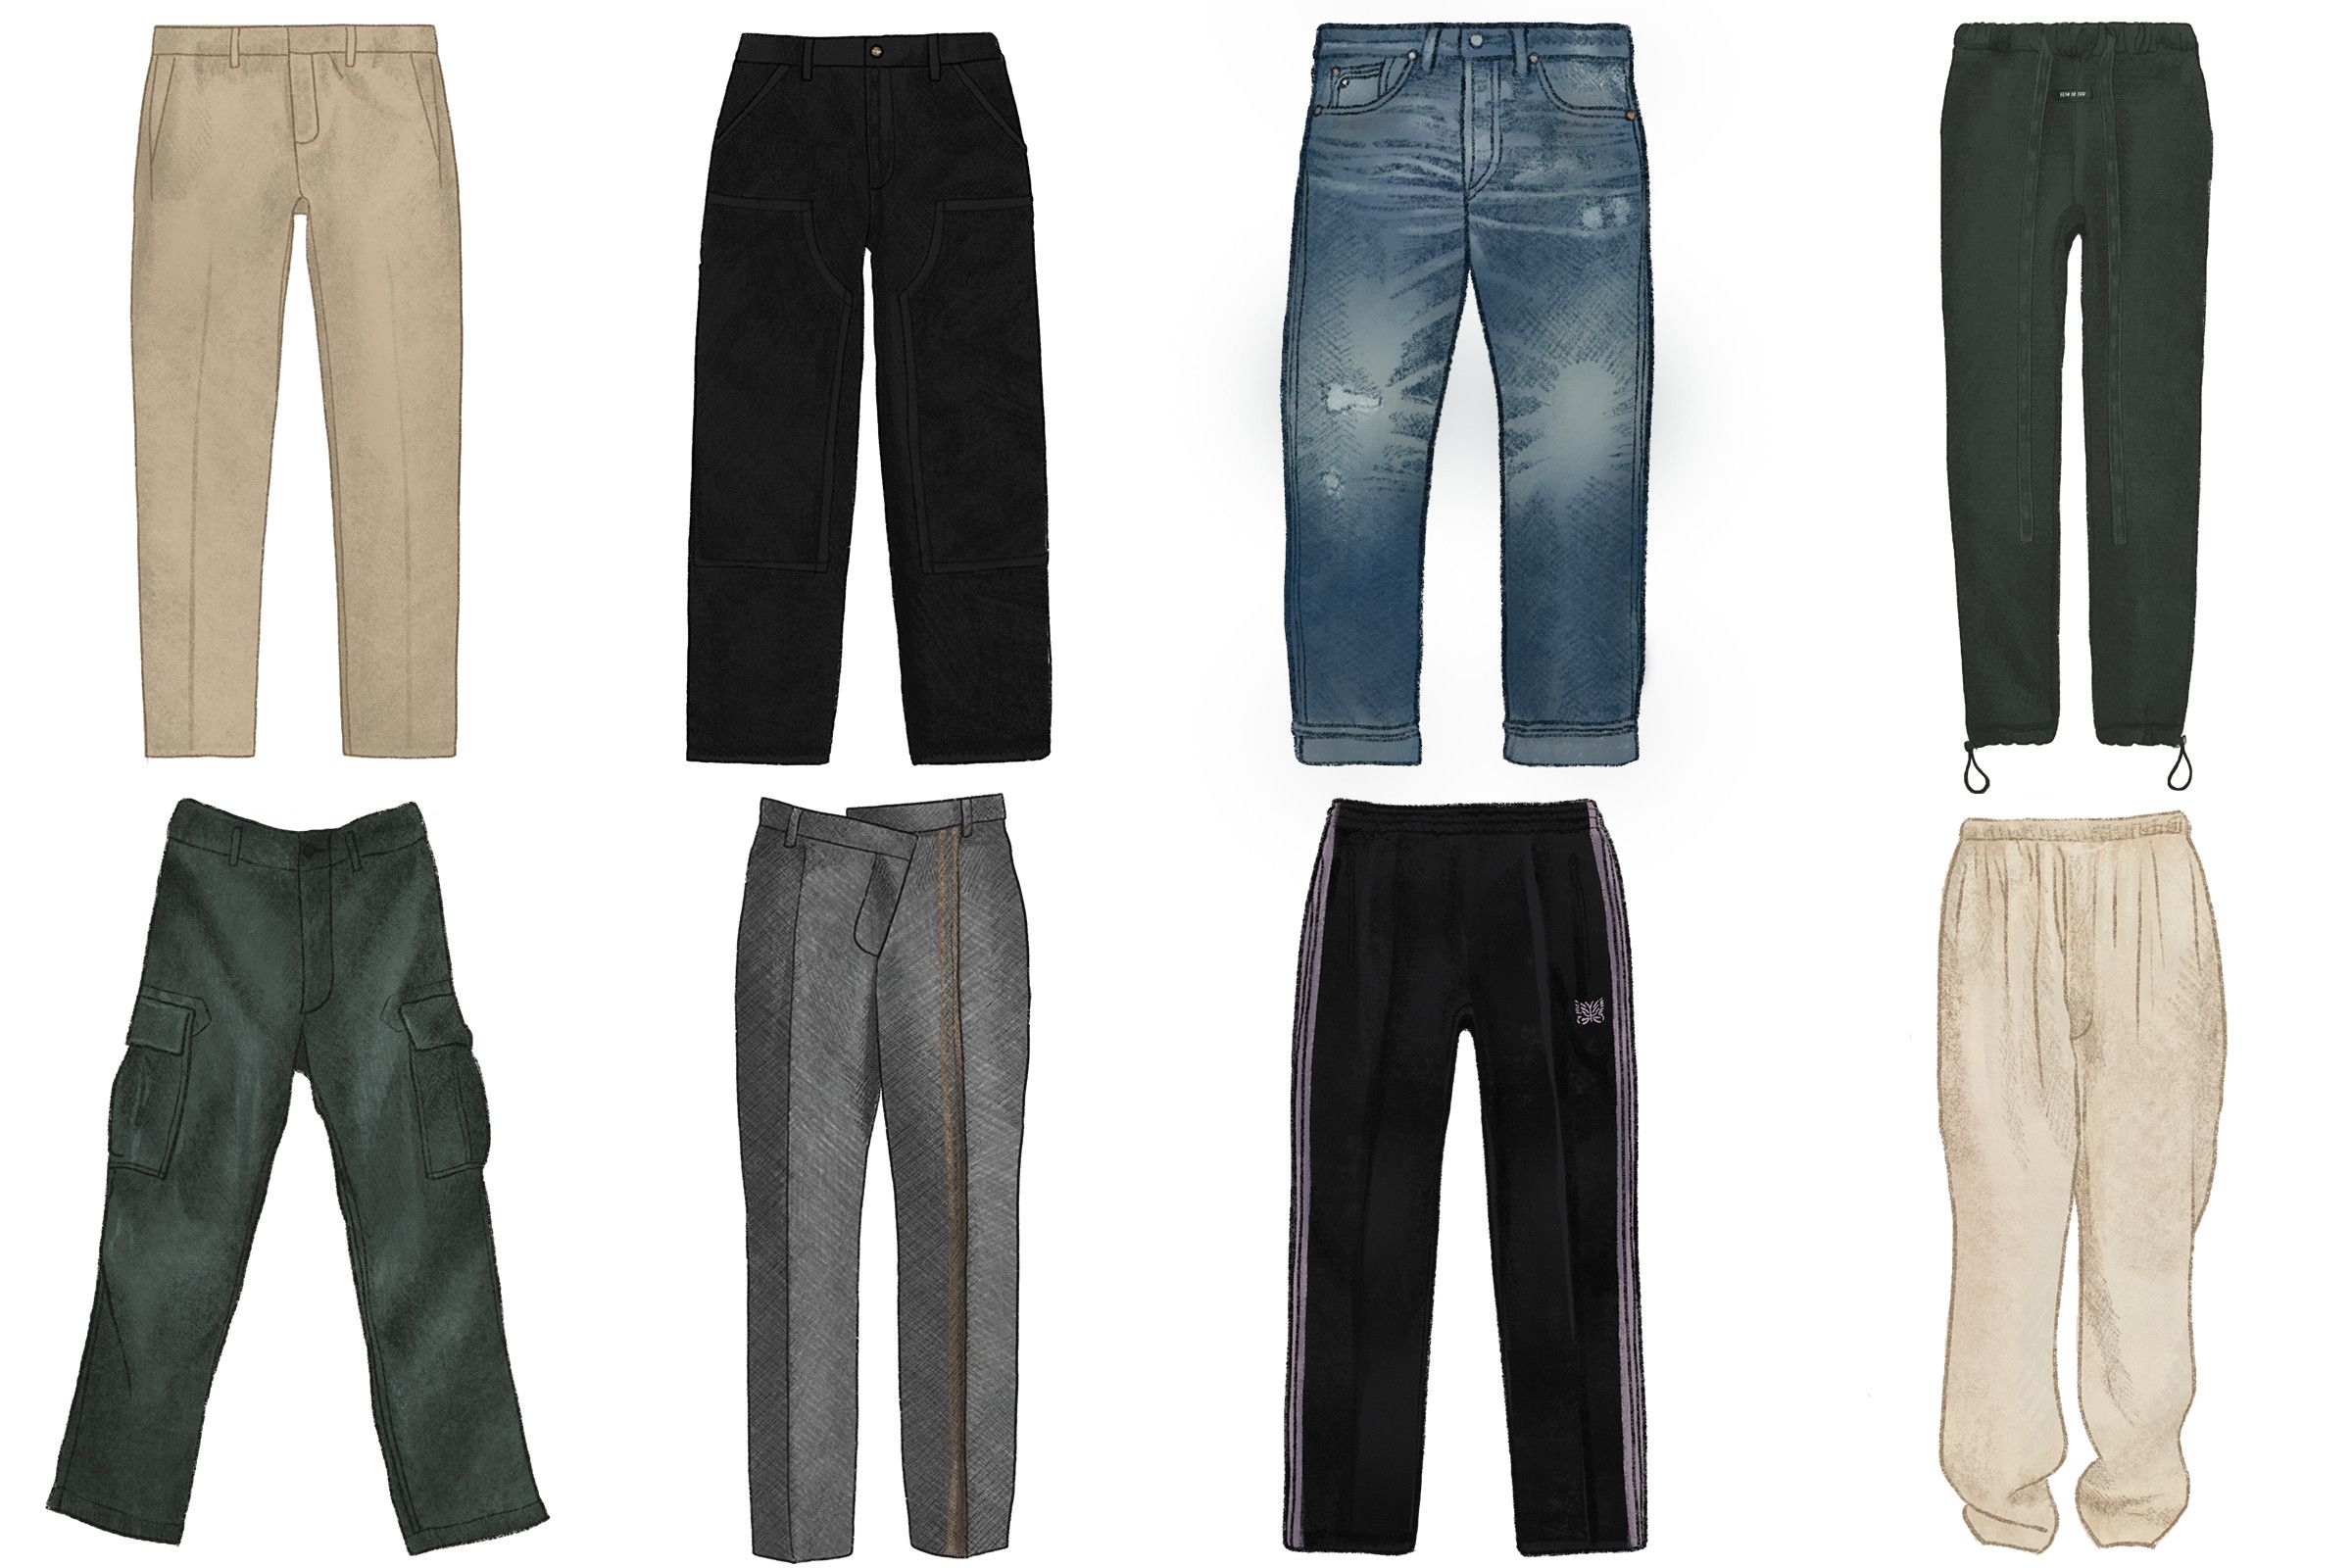 Men's Pant Styles Every Guy Should Own in 2019